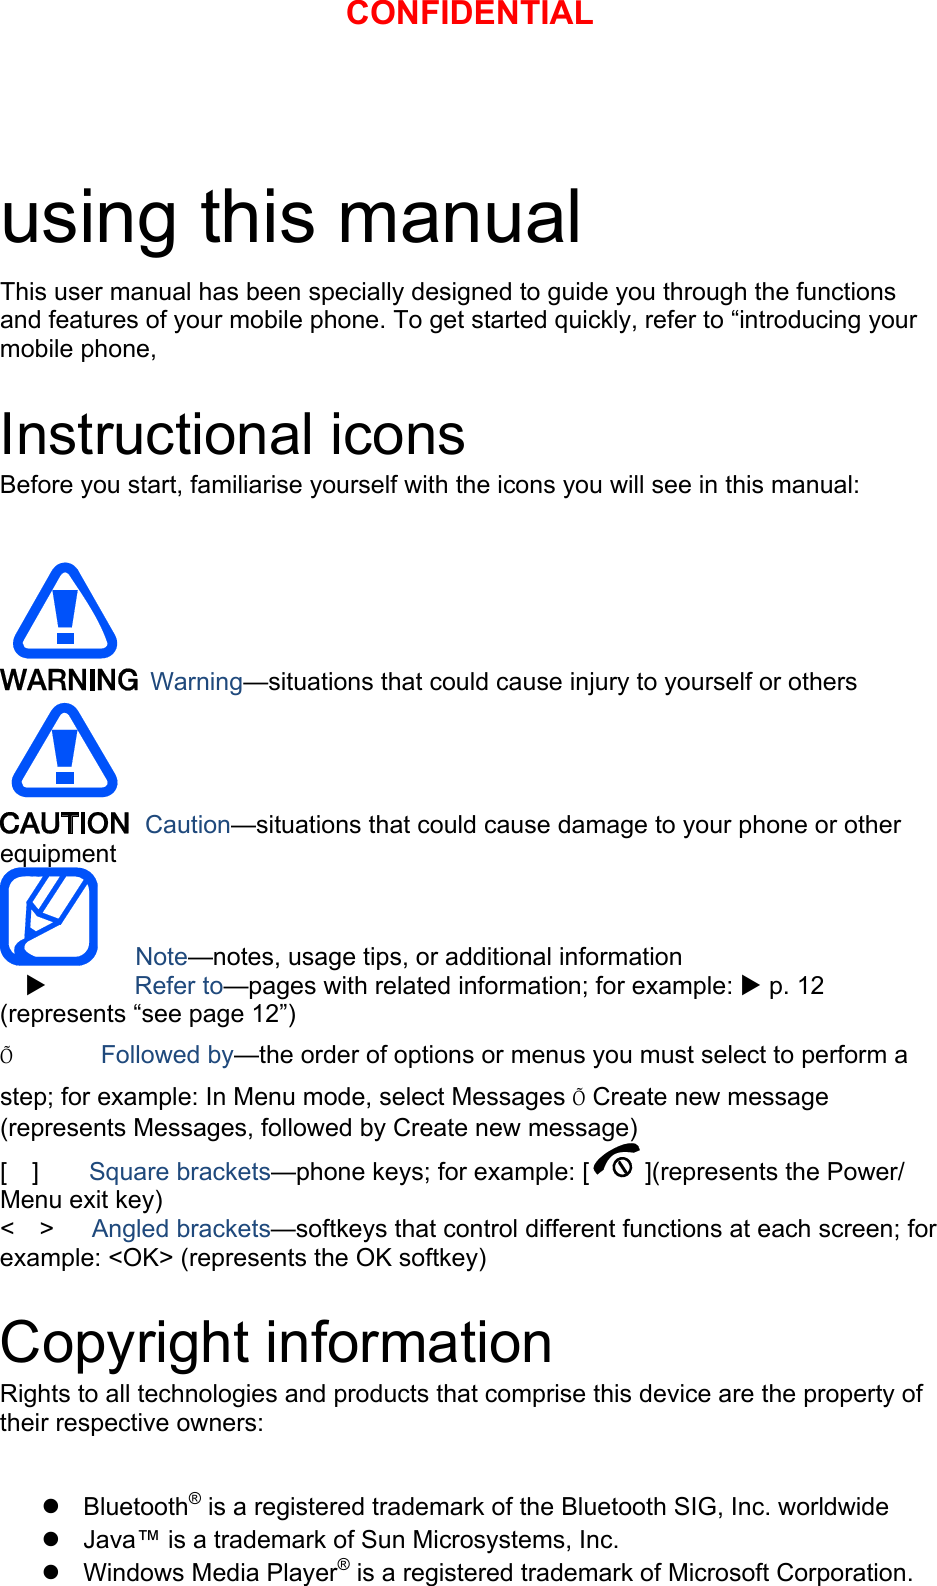 using this manual This user manual has been specially designed to guide you through the functions and features of your mobile phone. To get started quickly, refer to “introducing your mobile phone,  Instructional icons Before you start, familiarise yourself with the icons you will see in this manual:     Warning—situations that could cause injury to yourself or others  Caution—situations that could cause damage to your phone or other equipment    Note—notes, usage tips, or additional information   X       Refer to—pages with related information; for example: X p. 12 (represents “see page 12”) Õ       Followed by—the order of options or menus you must select to perform a step; for example: In Menu mode, select Messages Õ Create new message (represents Messages, followed by Create new message) [  ]    Square brackets—phone keys; for example: [ ](represents the Power/ Menu exit key) &lt;  &gt;   Angled brackets—softkeys that control different functions at each screen; for example: &lt;OK&gt; (represents the OK softkey)  Copyright information Rights to all technologies and products that comprise this device are the property of their respective owners:  z Bluetooth® is a registered trademark of the Bluetooth SIG, Inc. worldwide z  Java™ is a trademark of Sun Microsystems, Inc. z Windows Media Player® is a registered trademark of Microsoft Corporation. CONFIDENTIAL